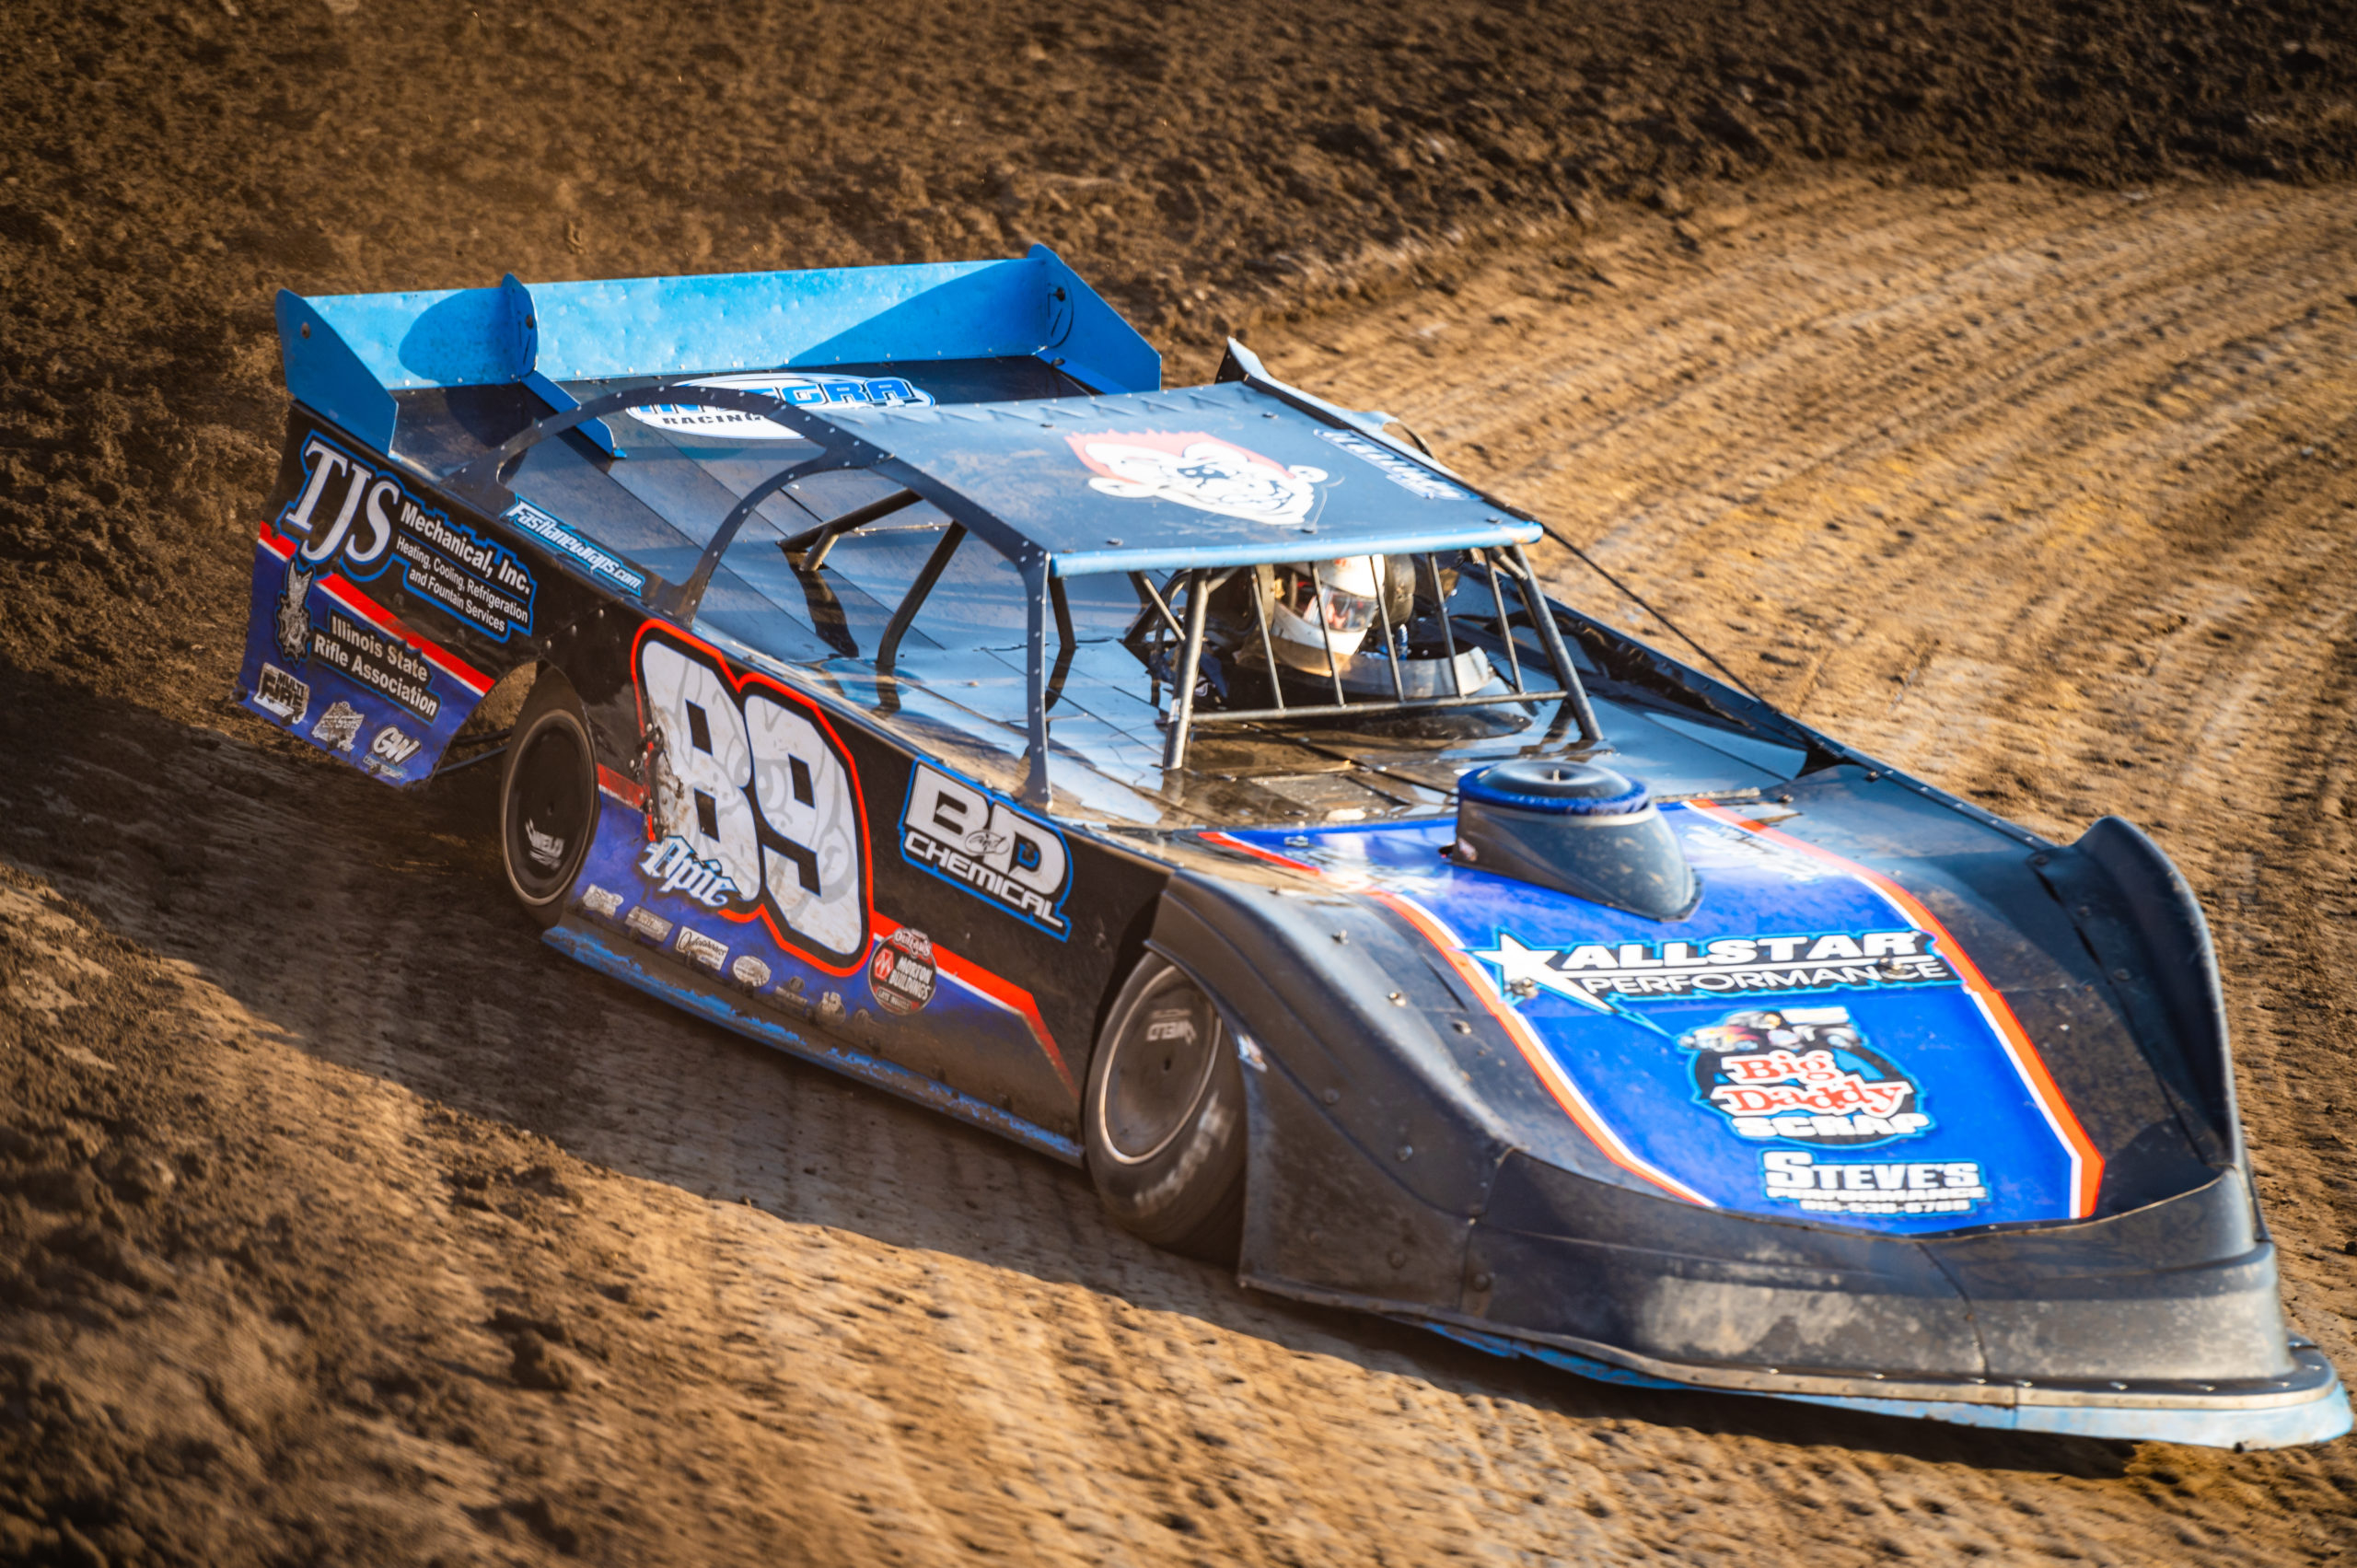 WHAT TO WATCH FOR MARS Late Model Thaw Brawl Hits LaSalle 